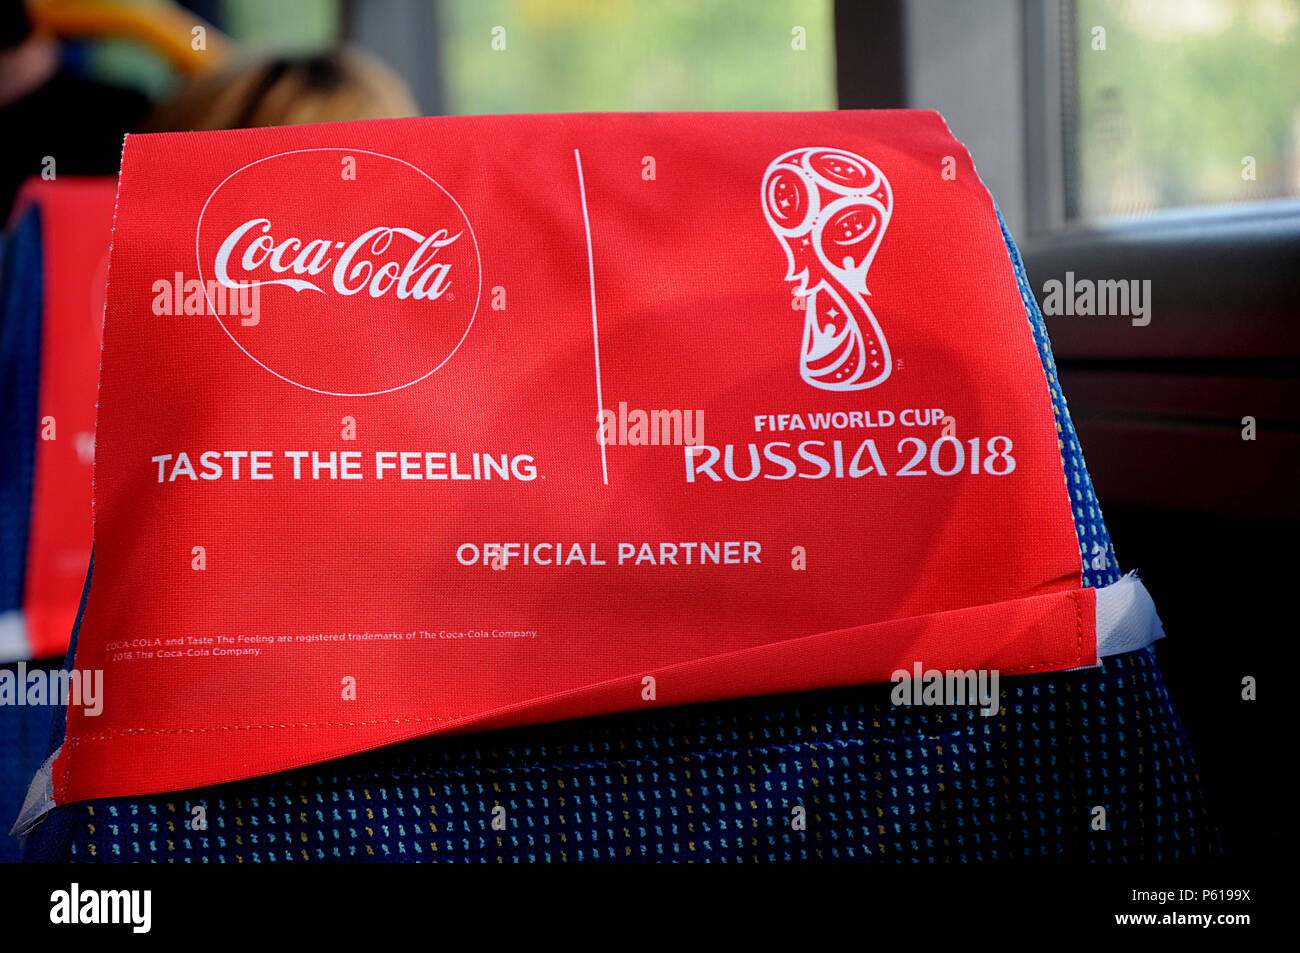 Copenhagen, Denmark. 28th Jun, 2018. American coca cola drinks official  partner in Fifa world cup Russia 2018 commercial on Danish pubic buses.  Credit: Francis Joseph Dean / Deanpictures/Alamy Live News Stock Photo -  Alamy